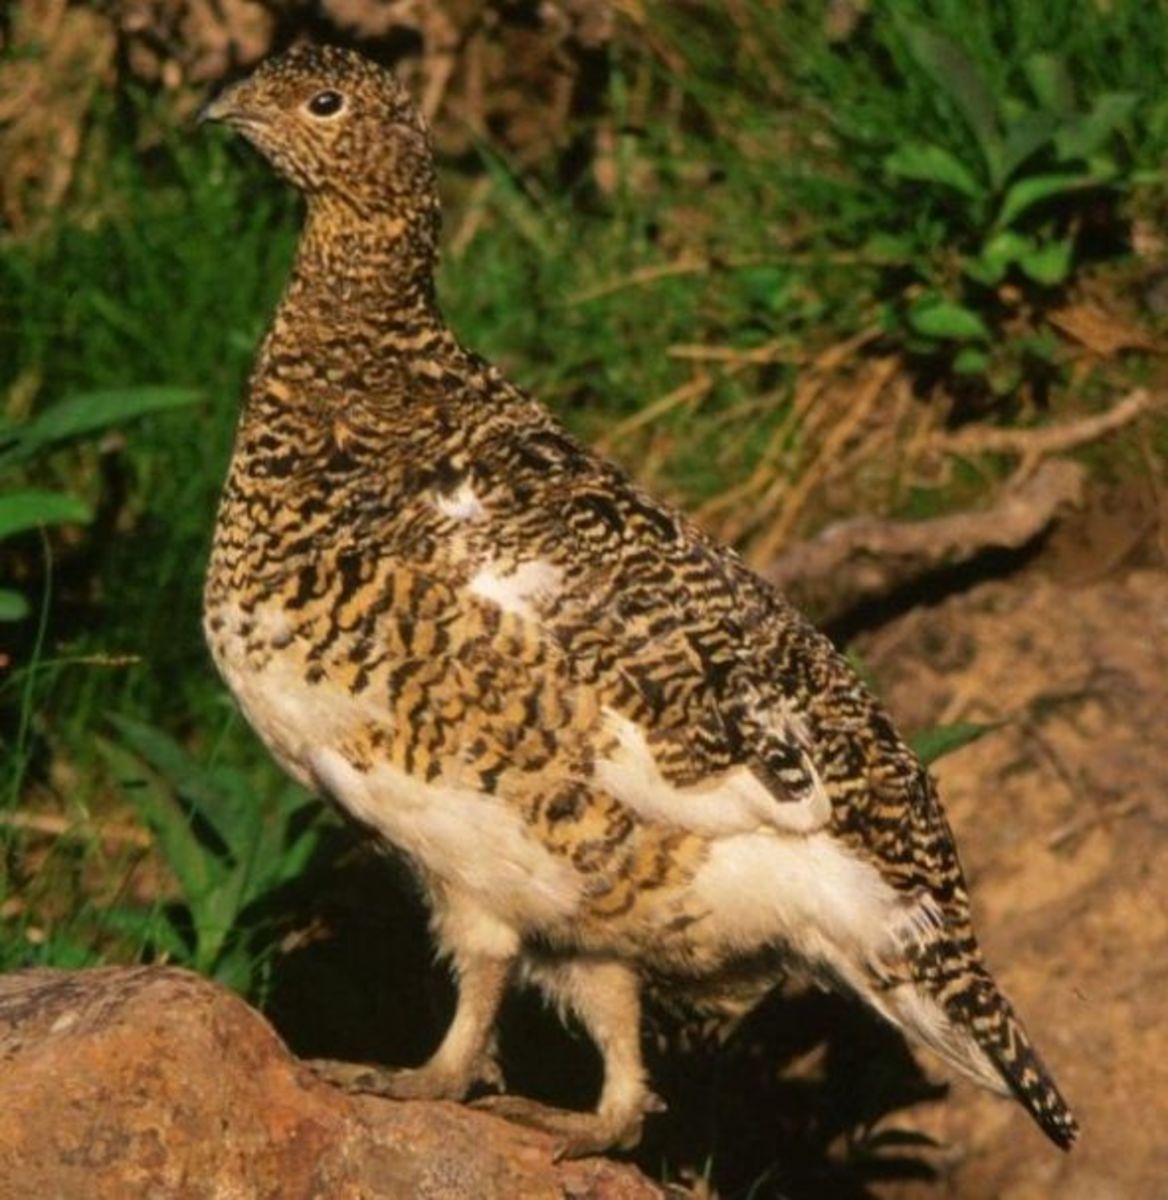 Rock Ptarmigan in Mount Ontake, showing the brown-toned summer plumage that helps the bird stay safely inconspicuous once the snow has melted away.